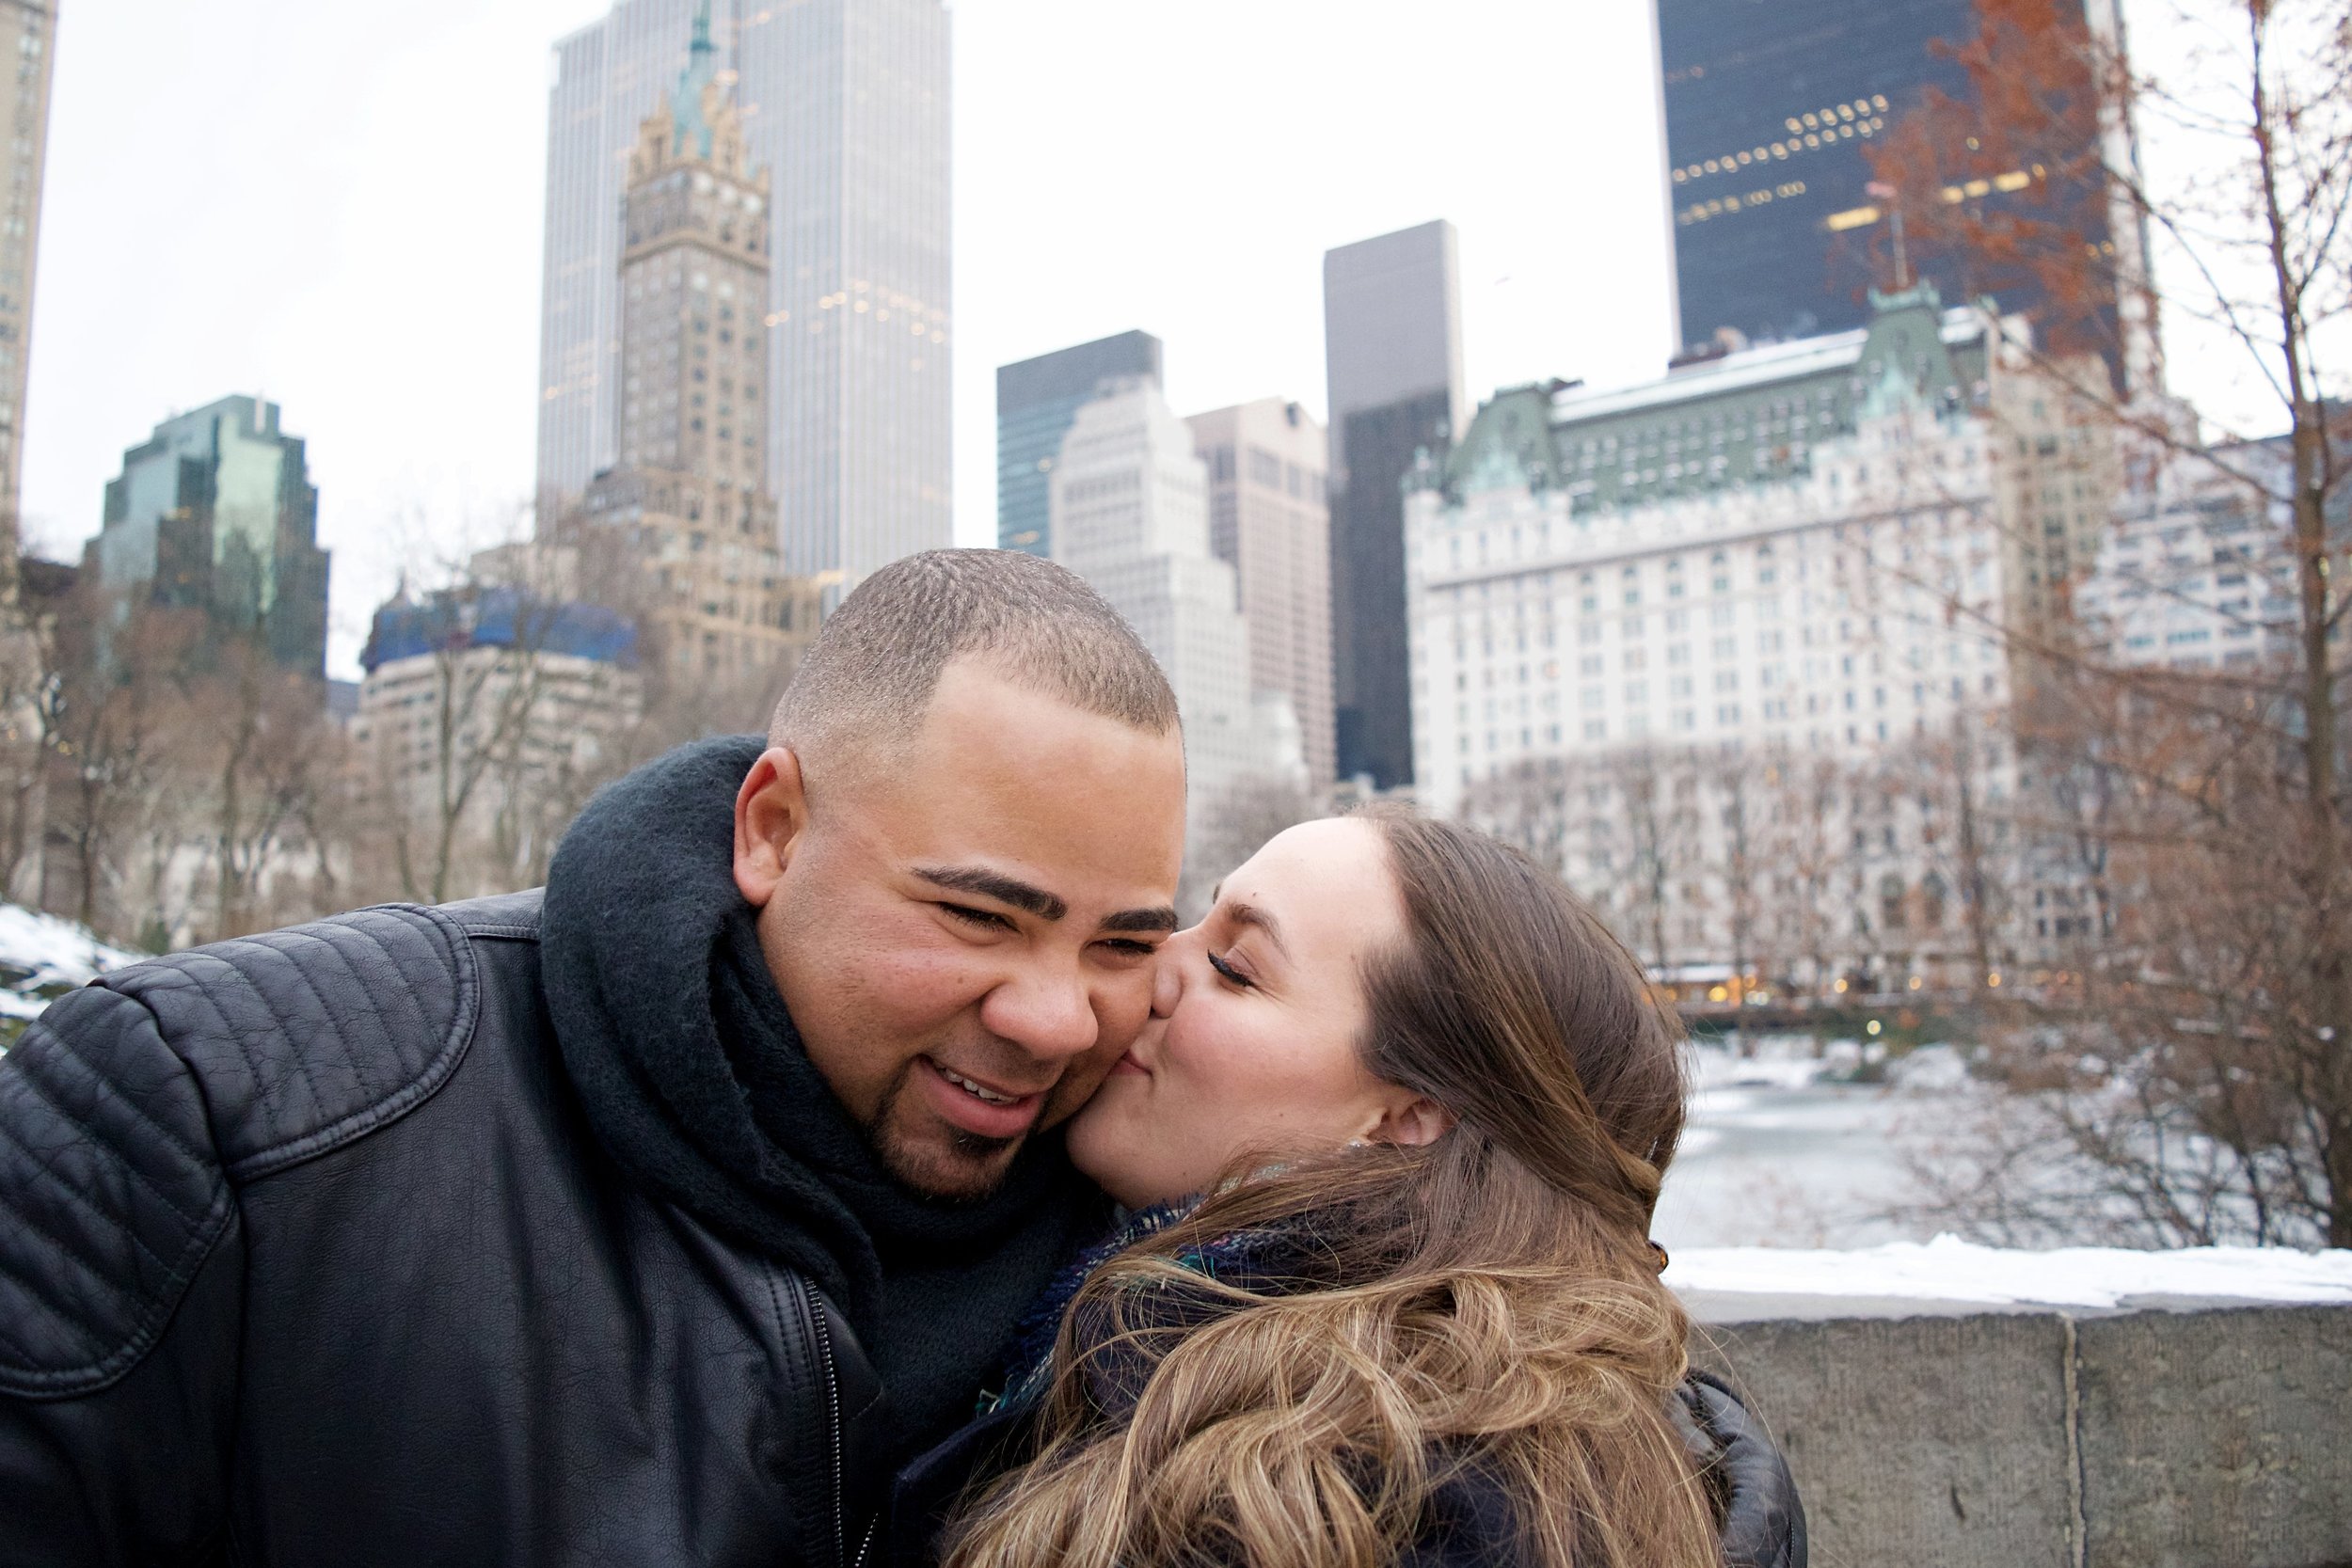  central park couples engagement photography nyc photographer  